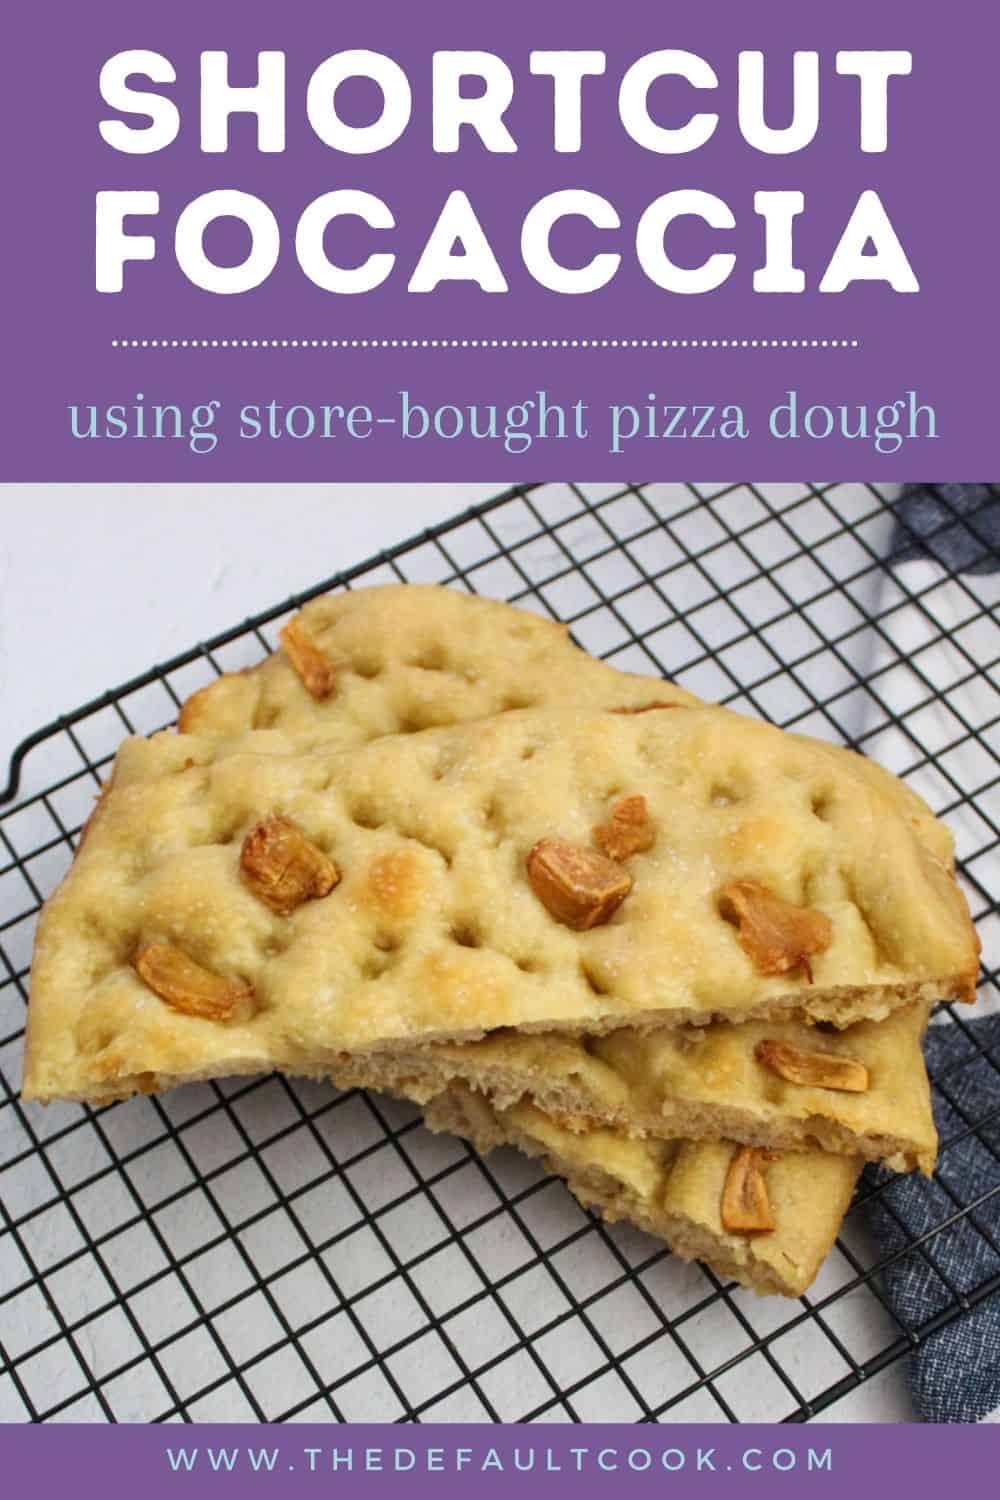 Sliced focaccia on a cooling rack with recipe name "shortcut focaccia" above the photo.